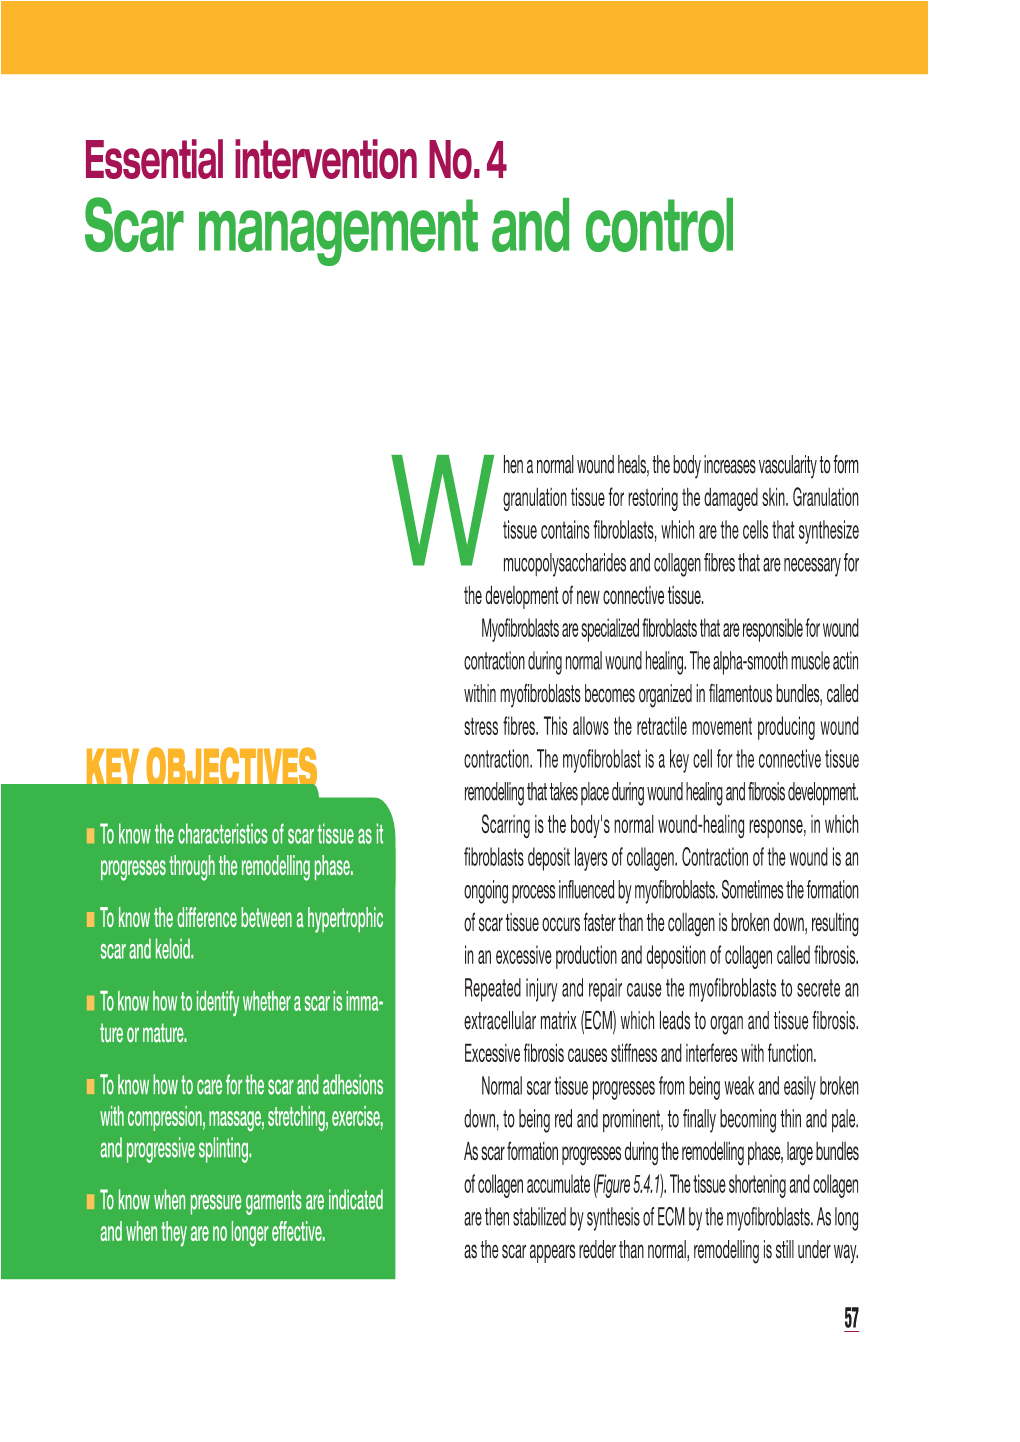 Essential Intervention No. 4 : Scar Management and Control